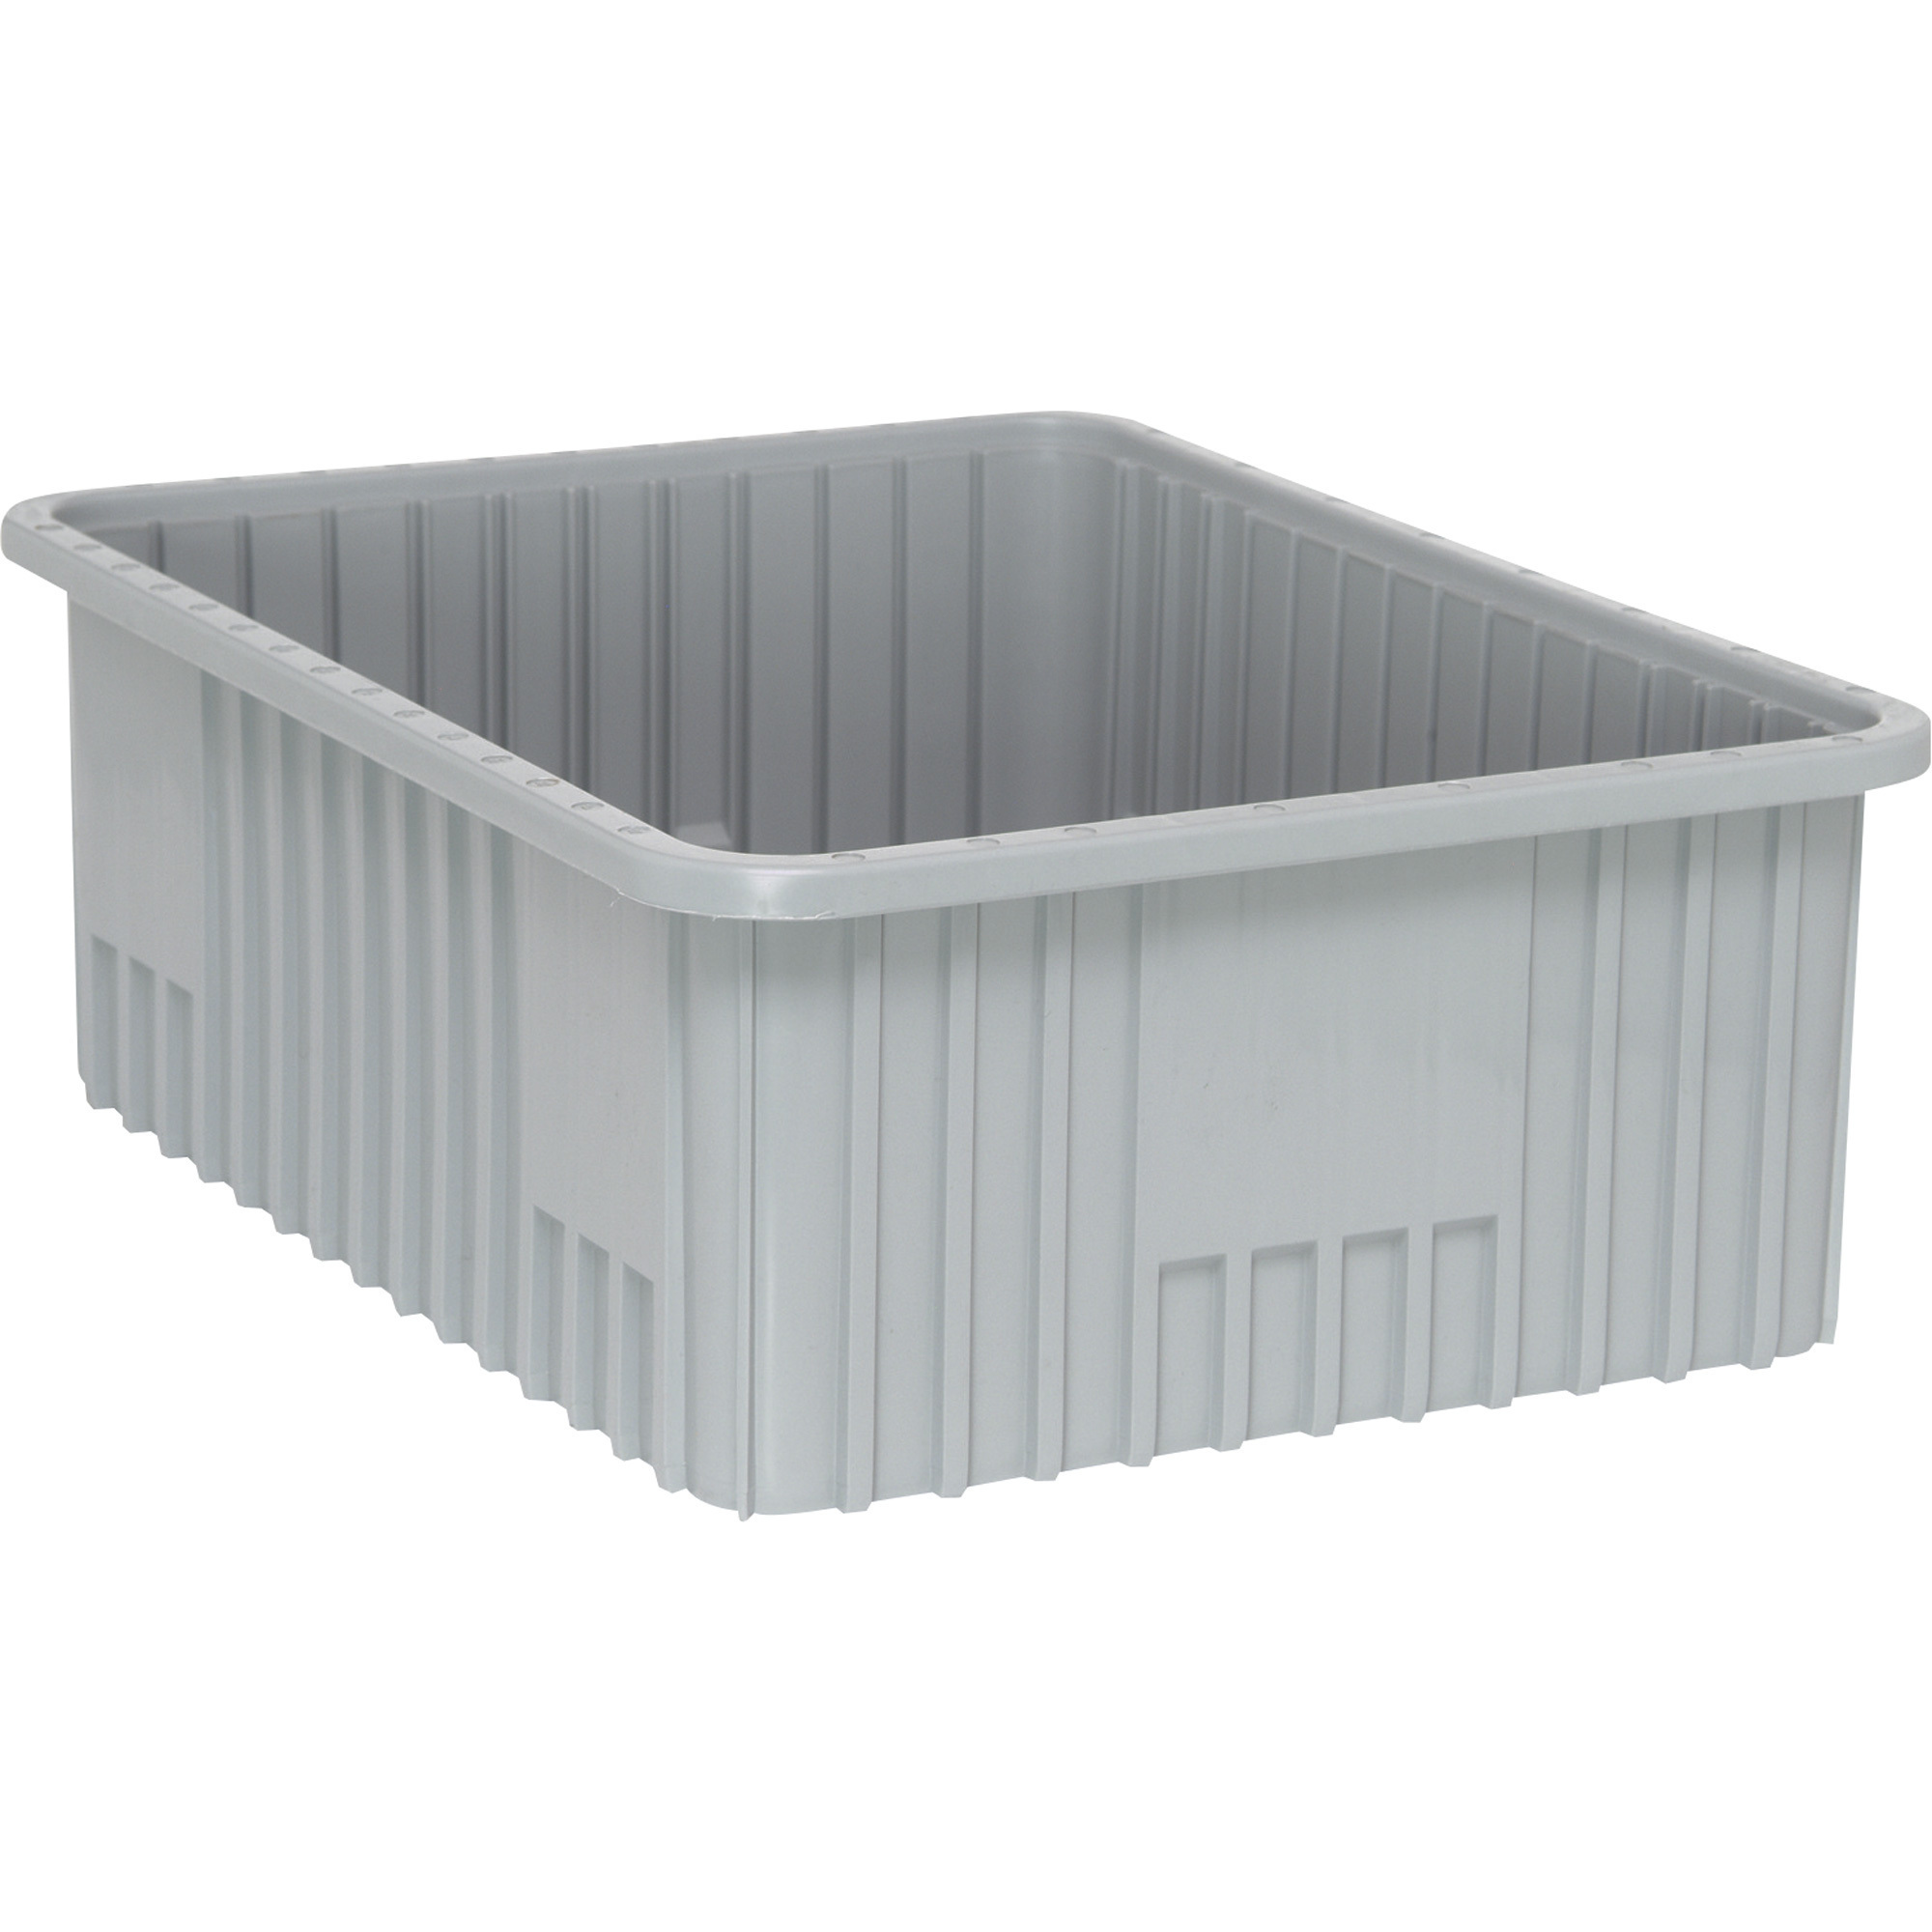 Quantum Storage Dividable Grid Container, 3-Pack, 22 1/2Inch L x 17 1/2Inch W x 8Inch H, Gray, Model DG93080GY